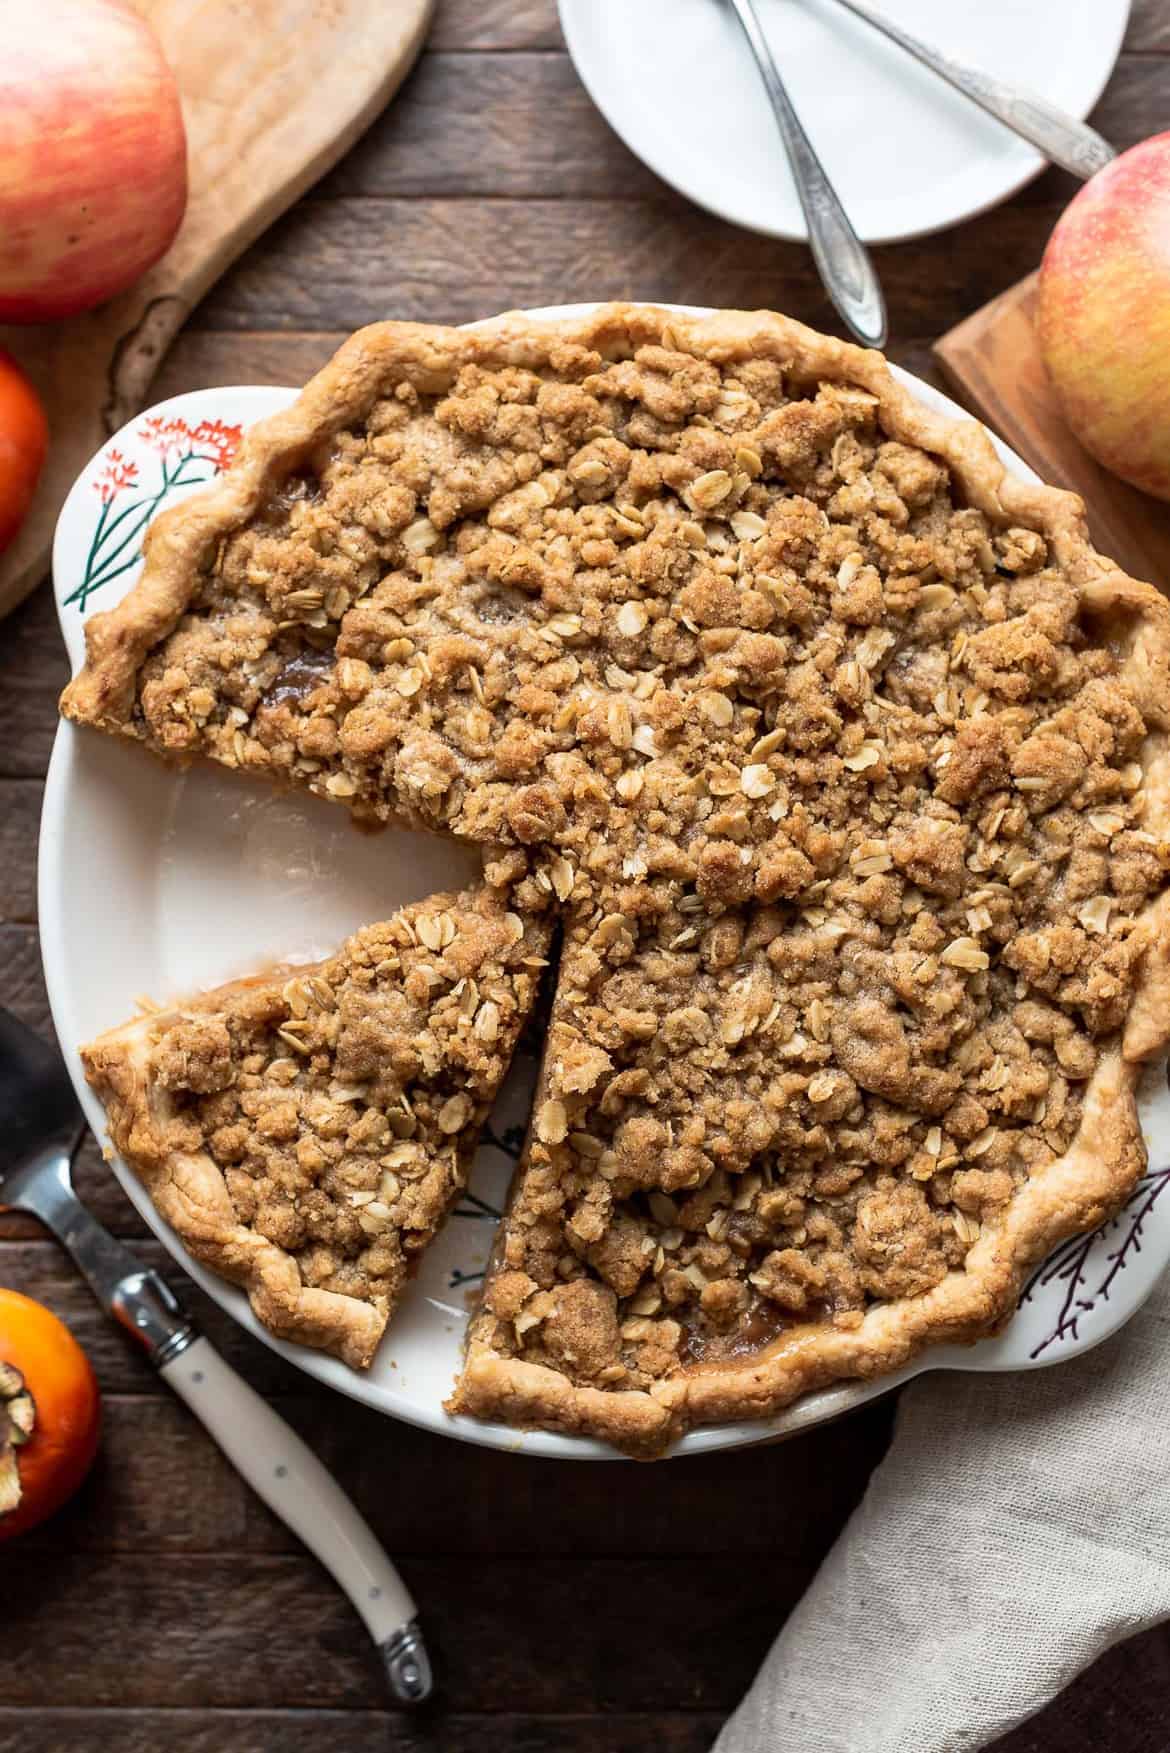 Persimmons are sweet in this Persimmon Apple Crumb Pie.